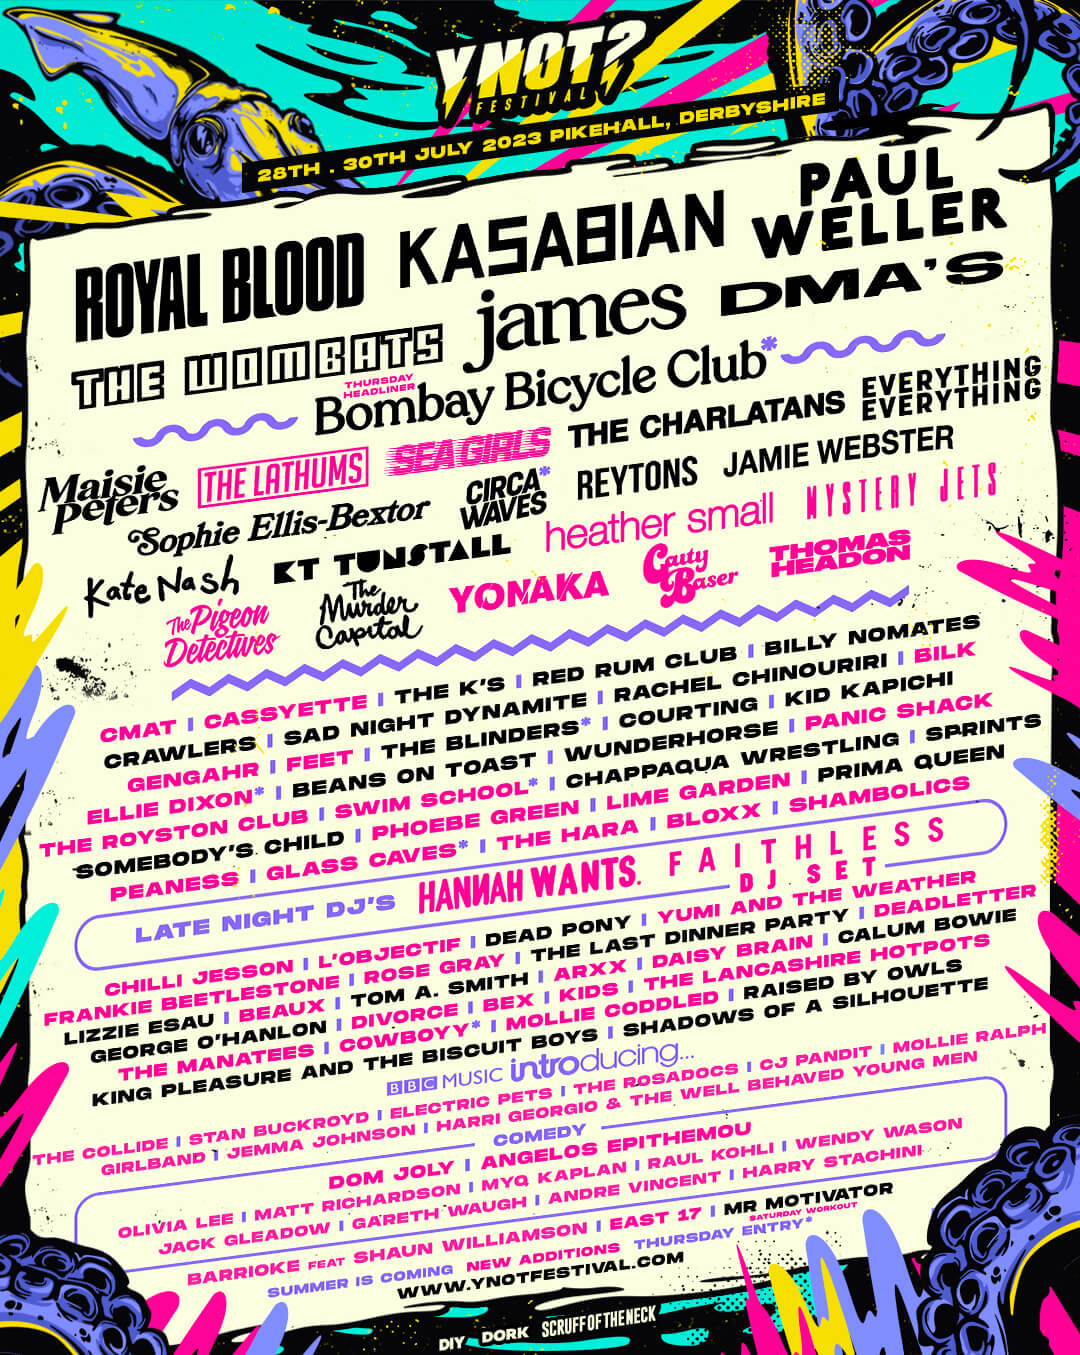 Y Not Festival poster